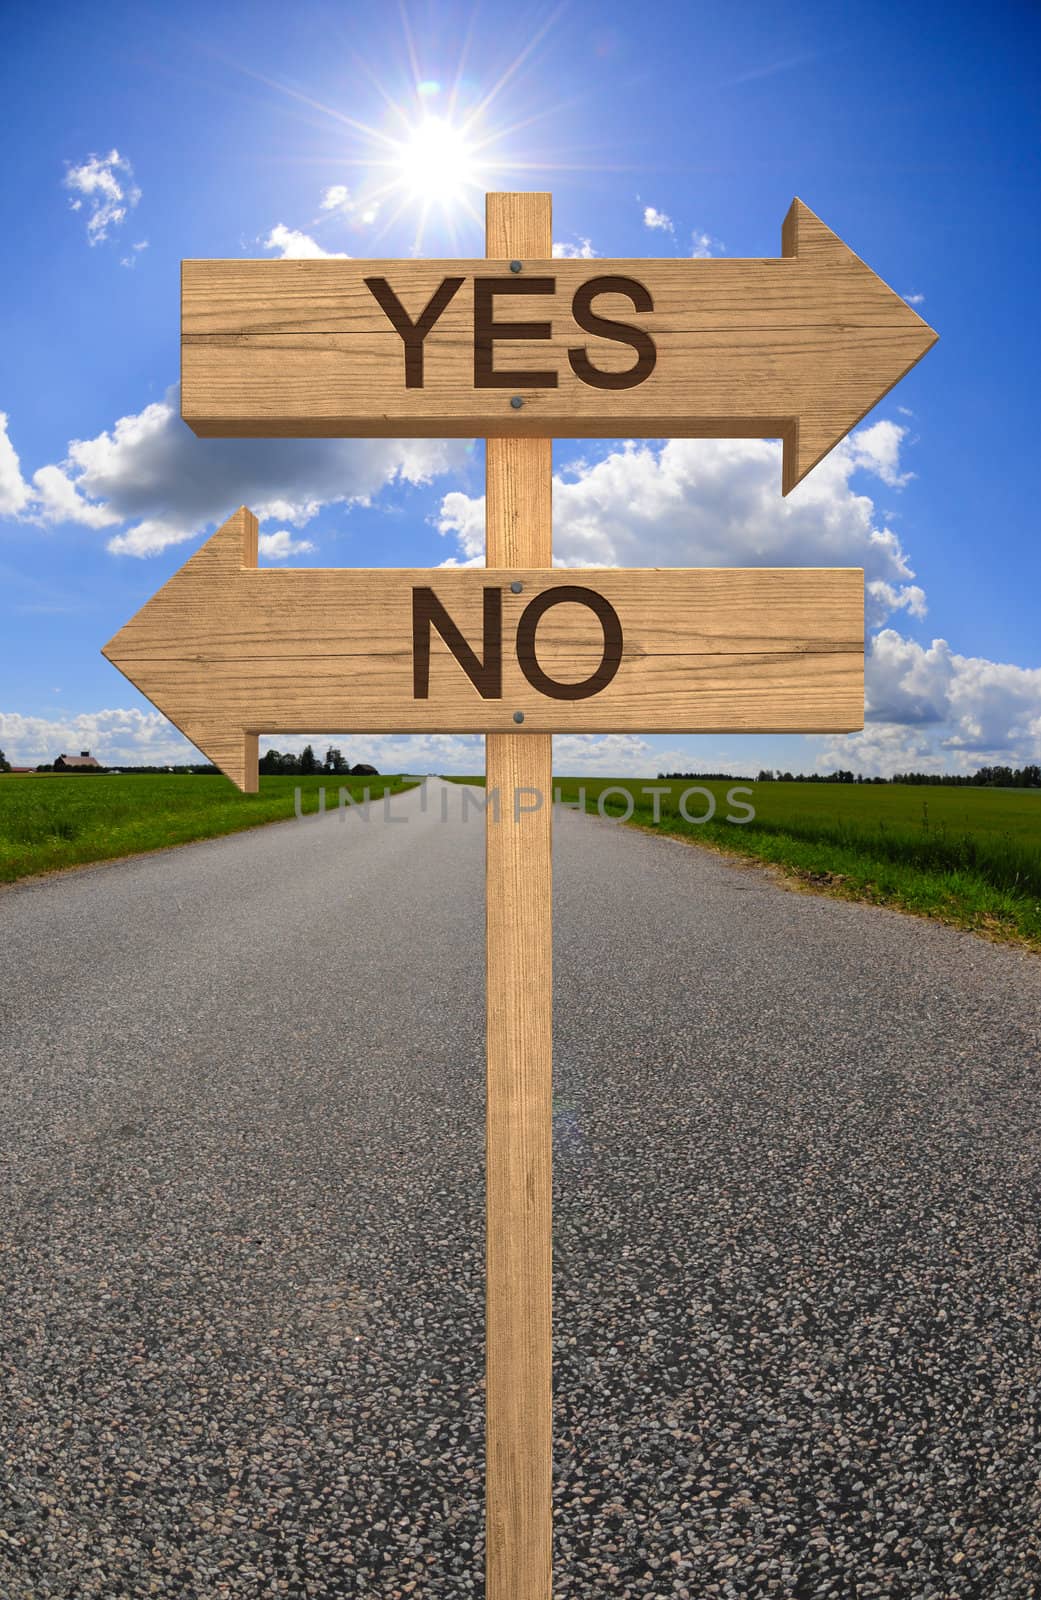 yes or no wood sign on road